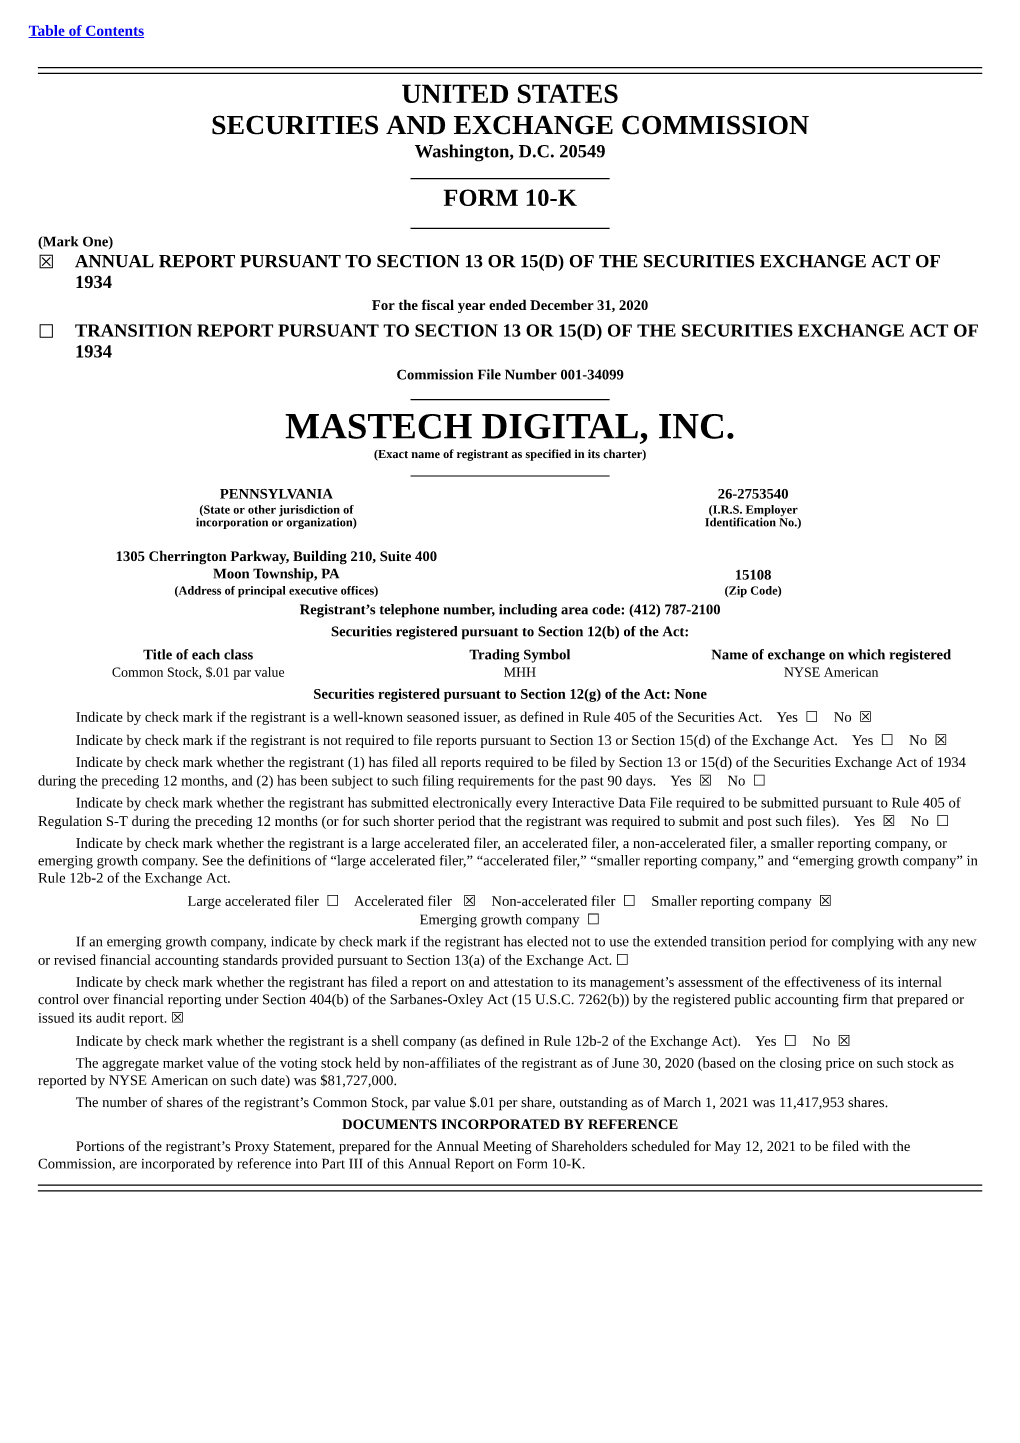 MASTECH DIGITAL, INC. (Exact Name of Registrant As Specified in Its Charter)